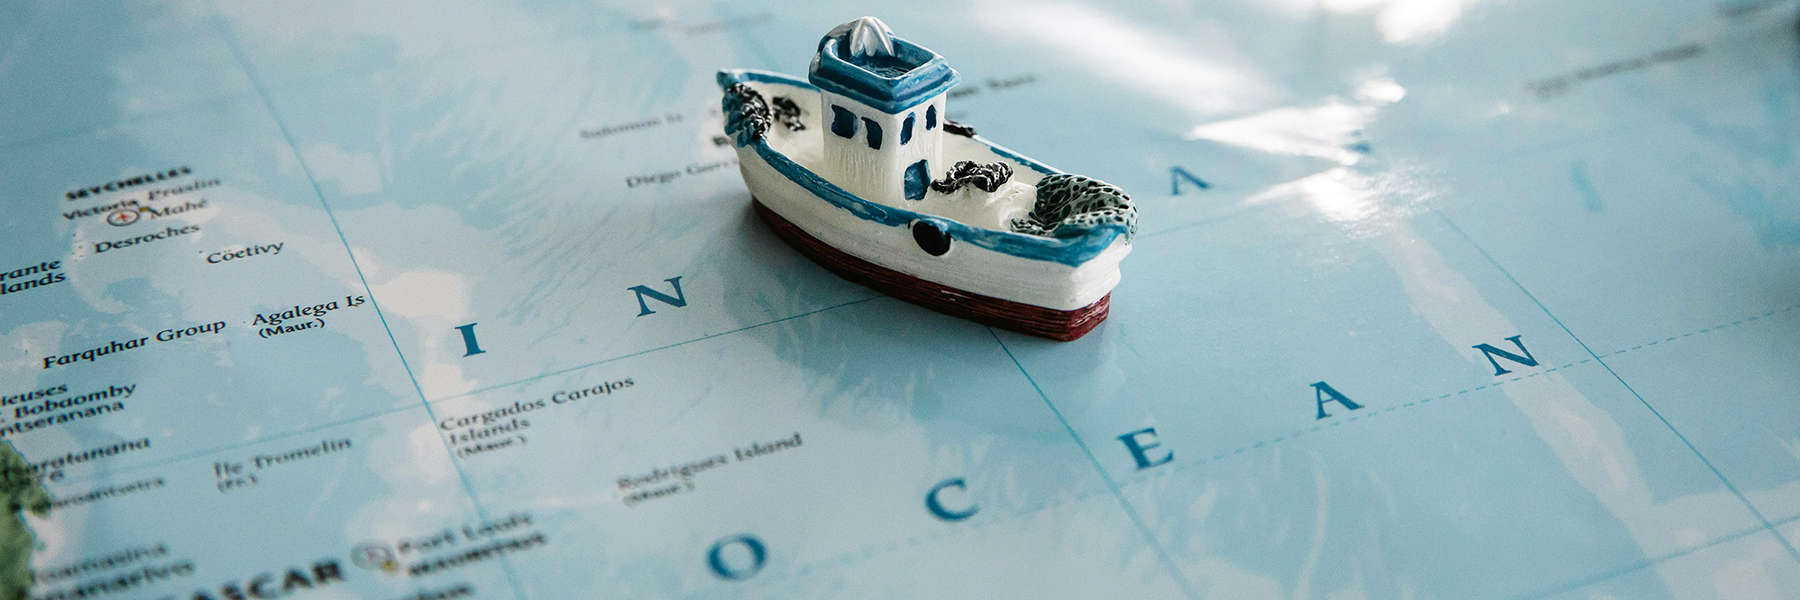 Toy boat on a map of the Indian Ocean BANNER